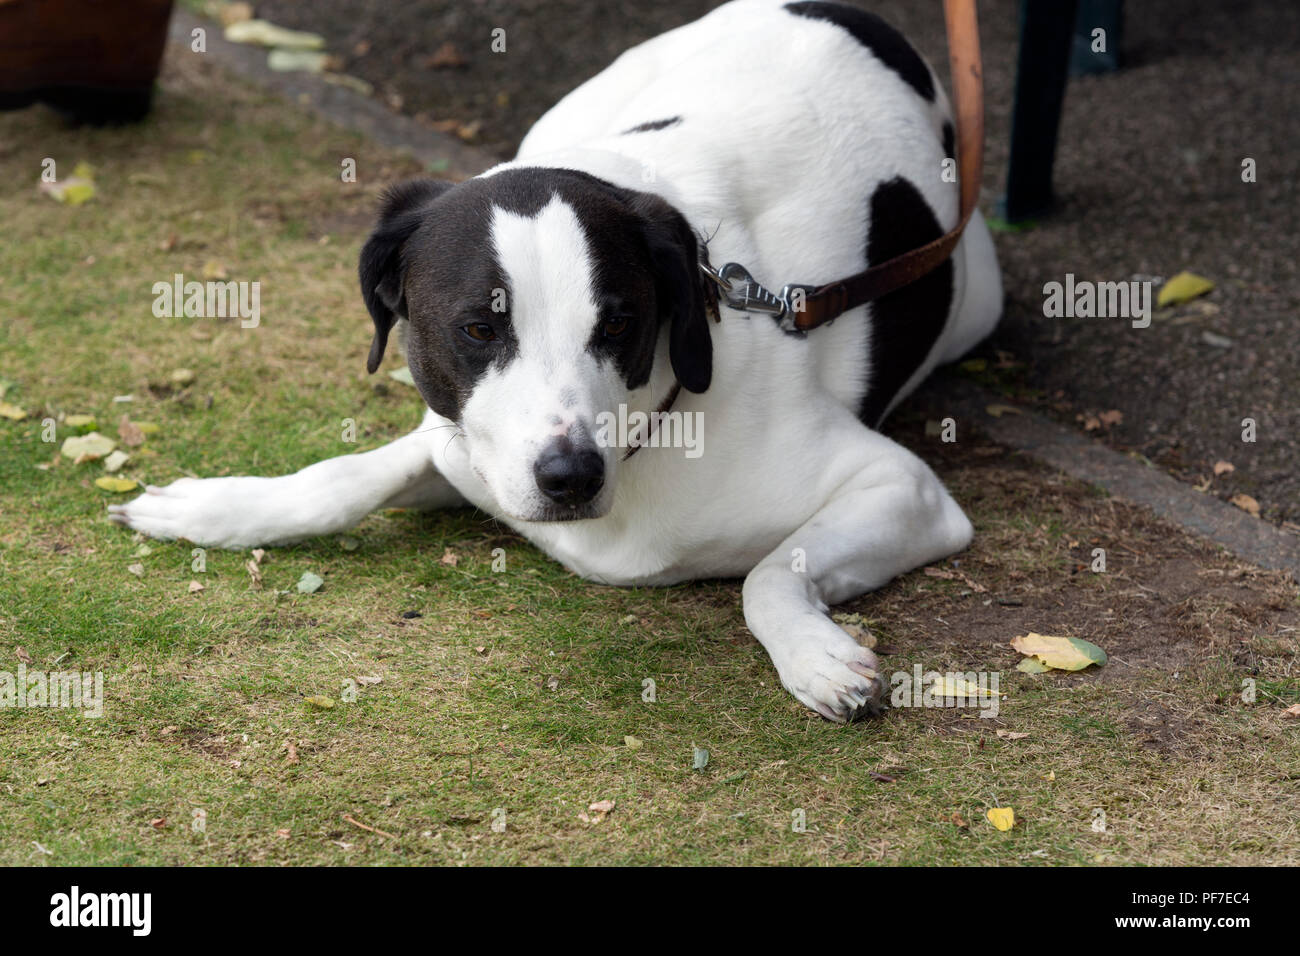 A spectator`s dog at the national women`s lawn bowls championships, Leamington Spa, UK Stock Photo